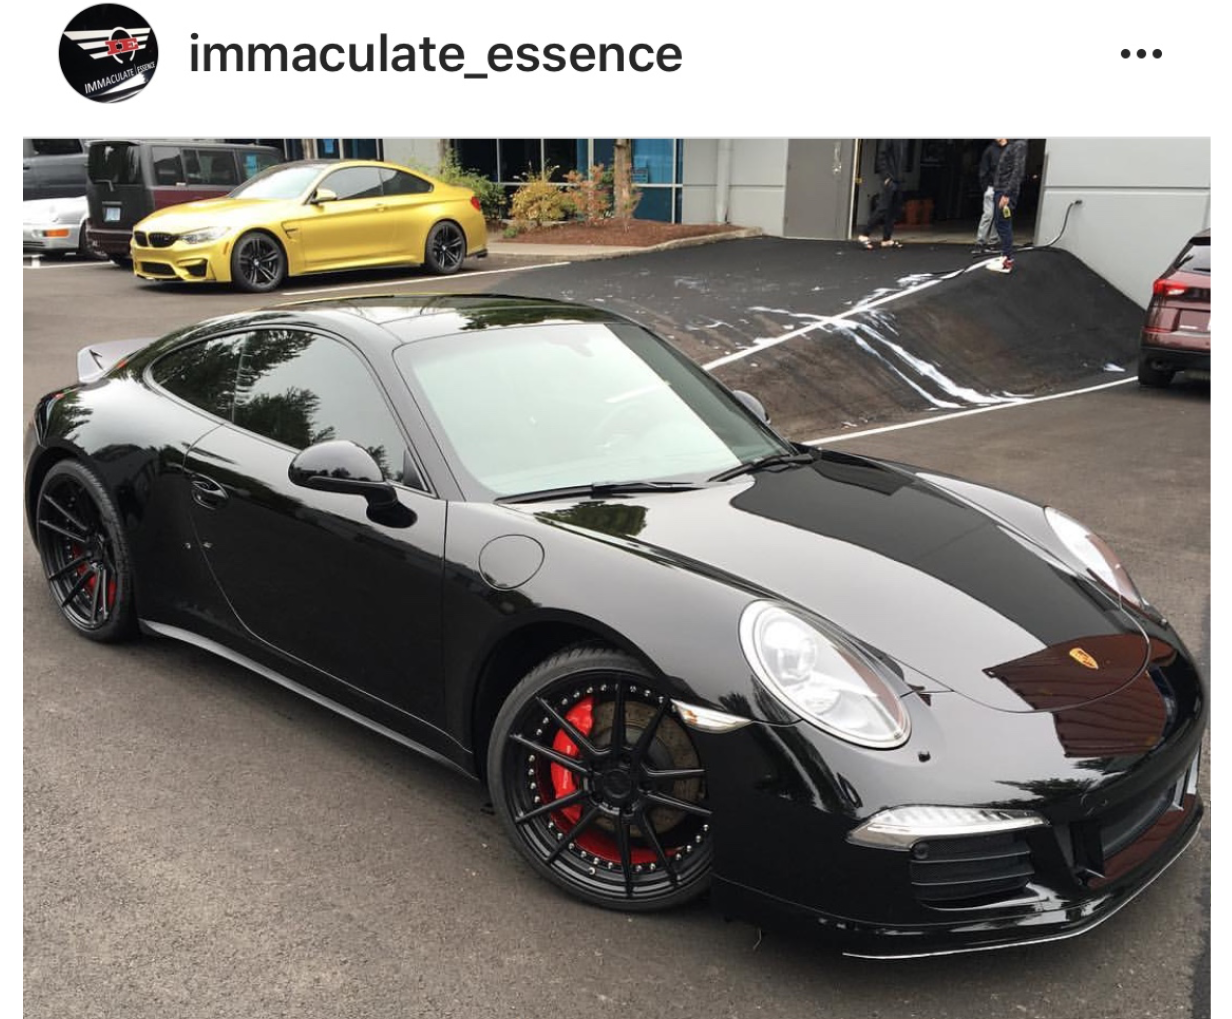 Expel & ceramic pro or Modesta which combo gives protection and wet look -  Rennlist - Porsche Discussion Forums